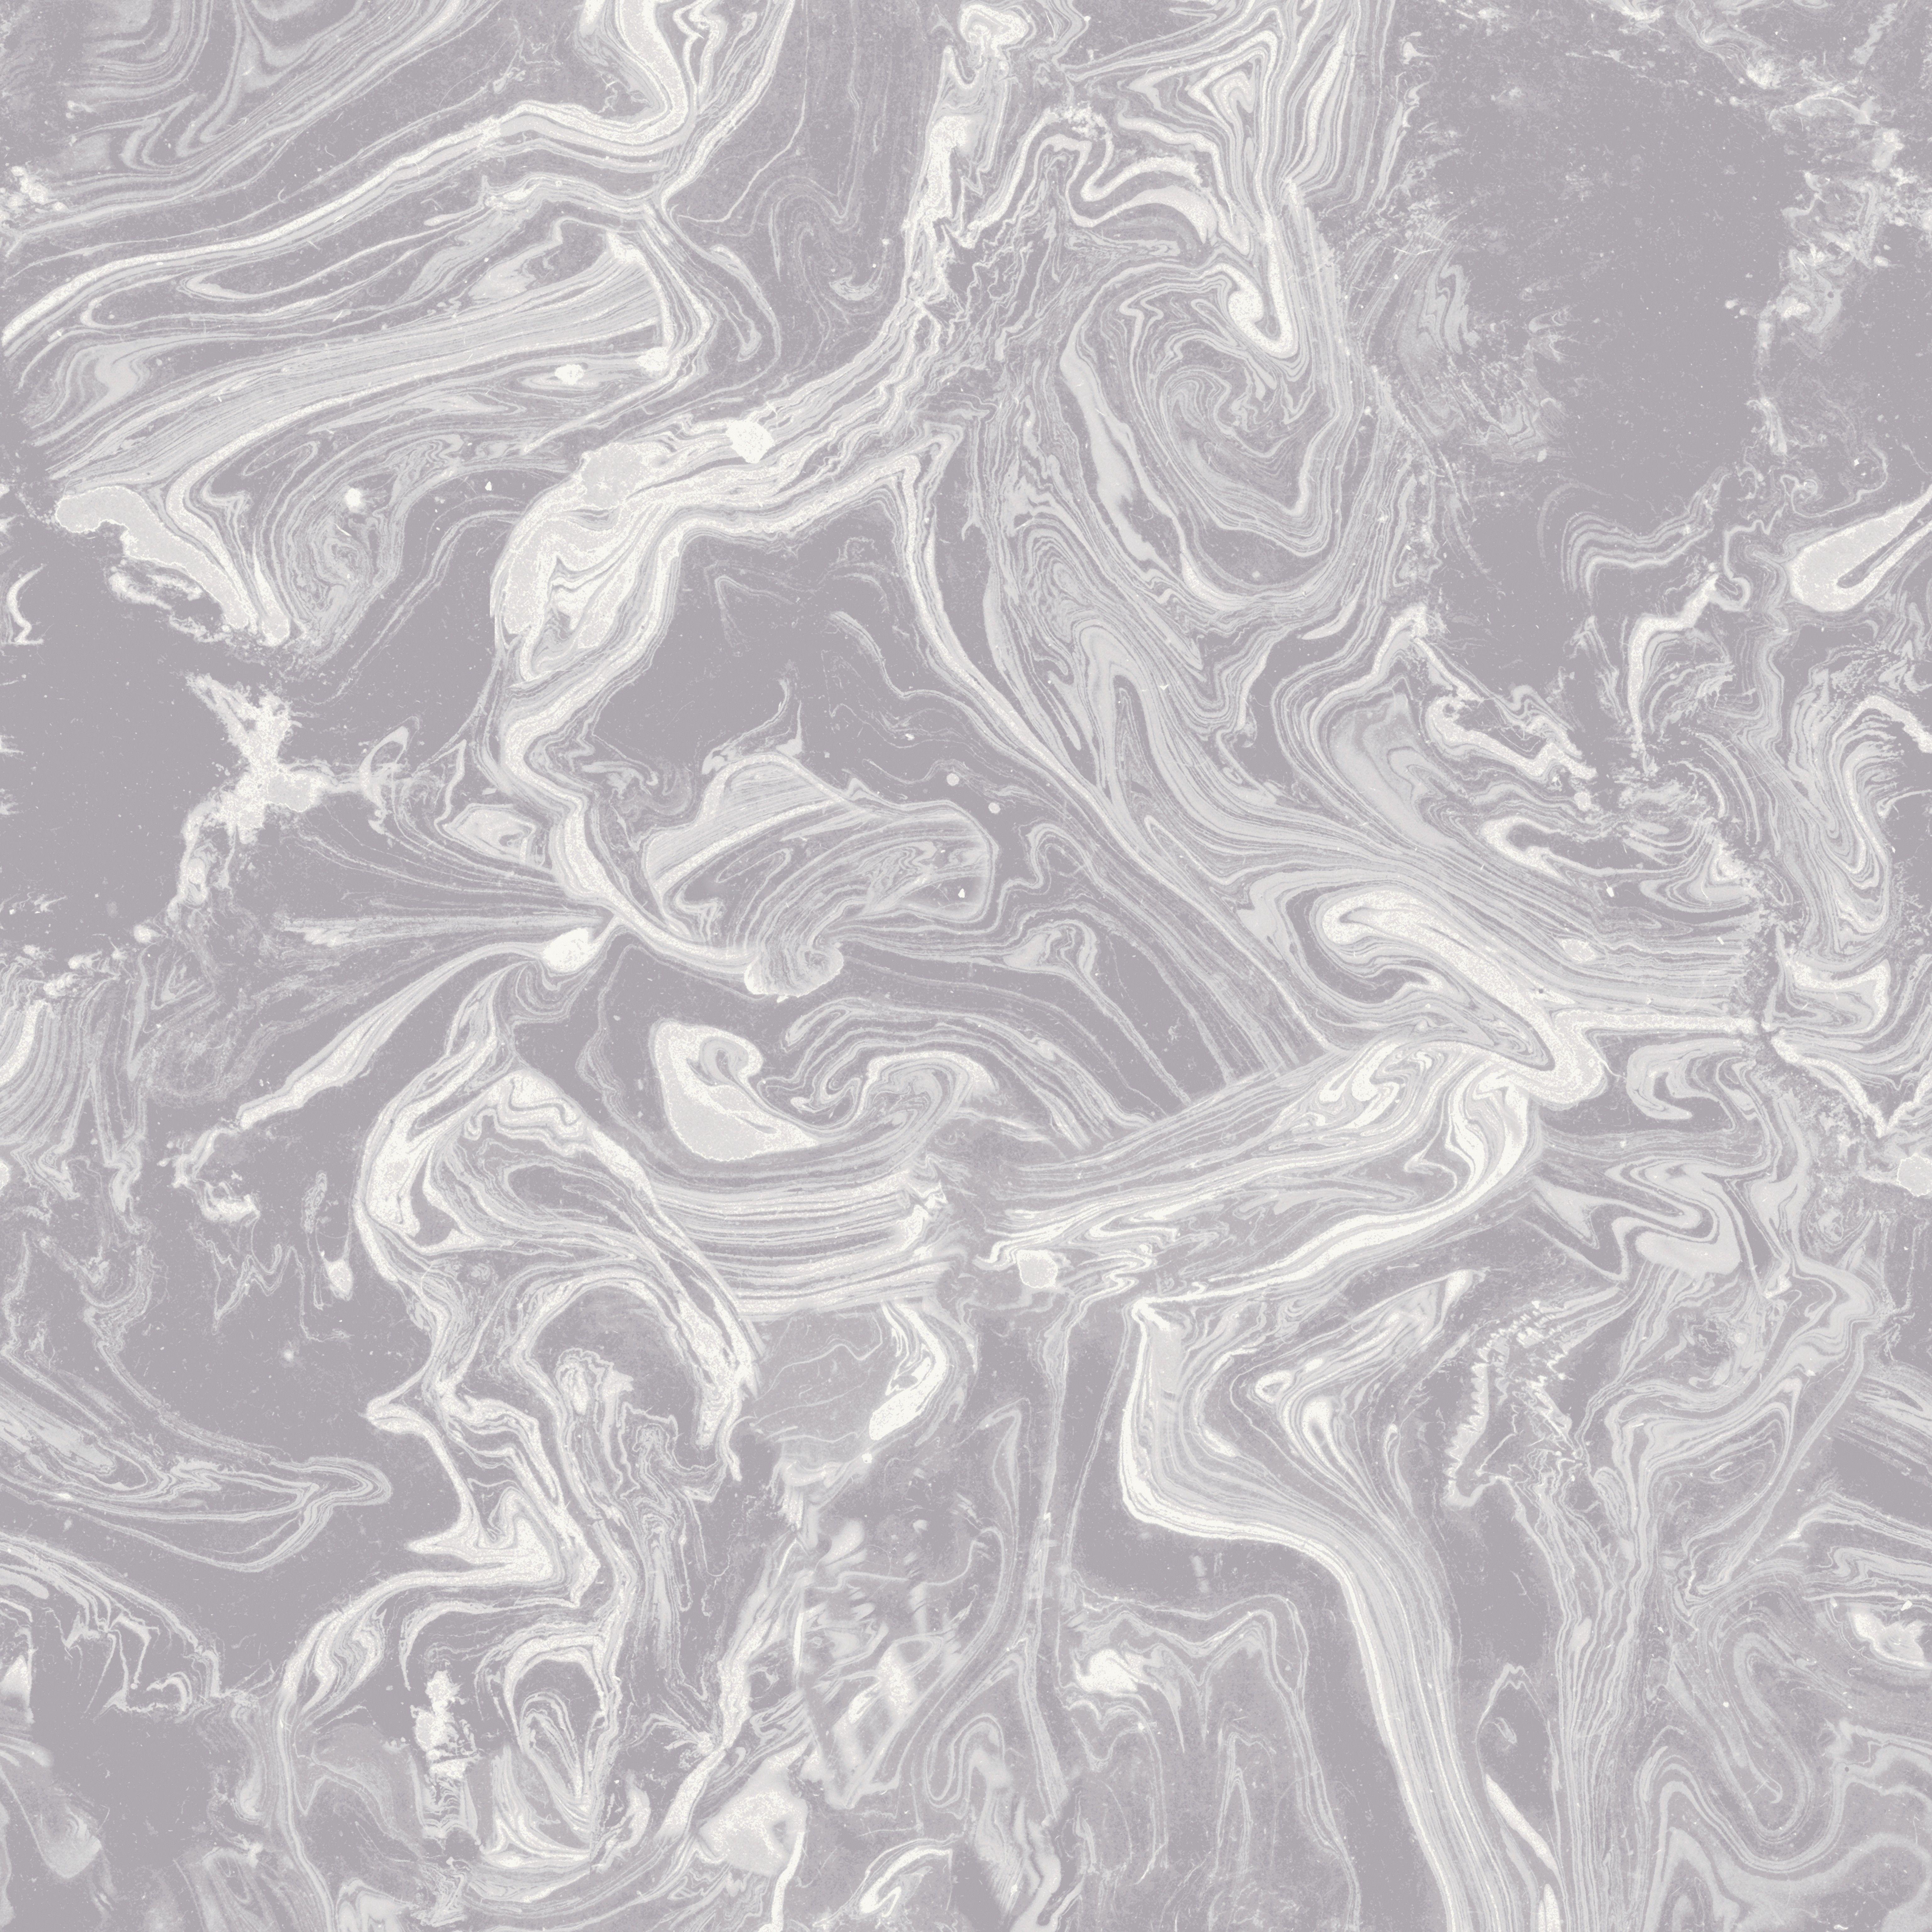 Marbled Mist Removable Wallpaper, Gray